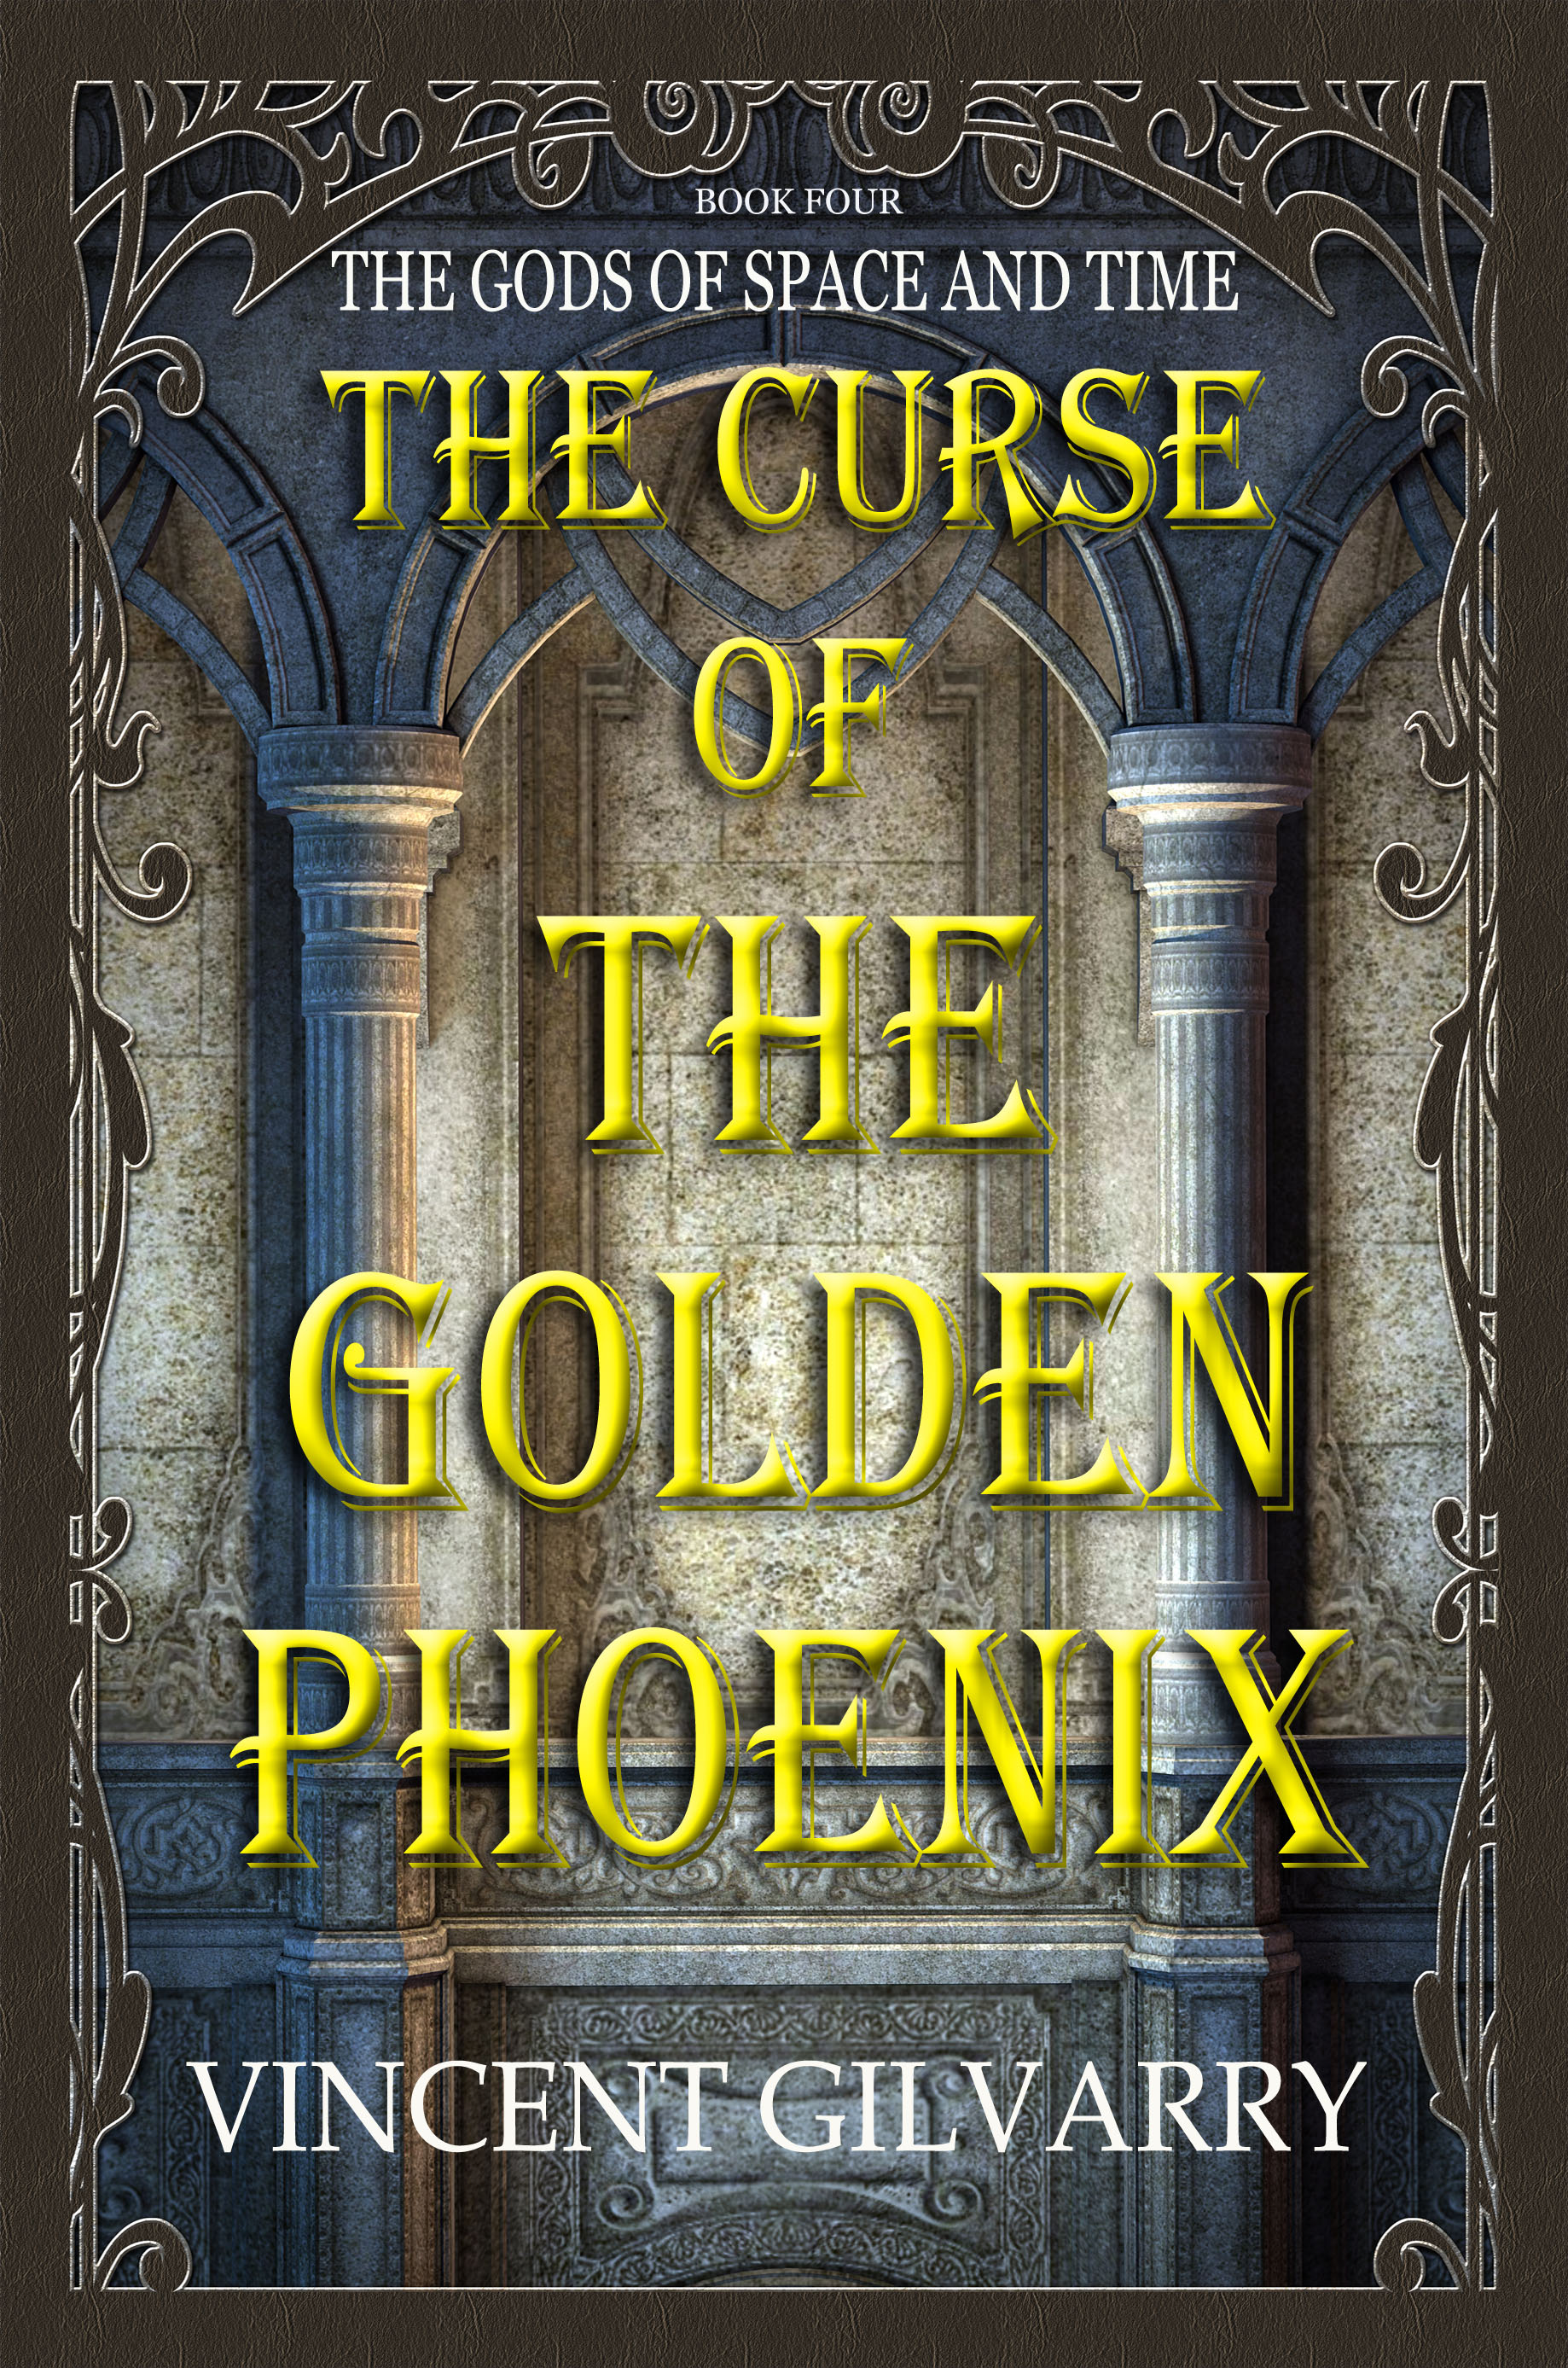 THE CURSE OF THE GOLDEN PHOENIX